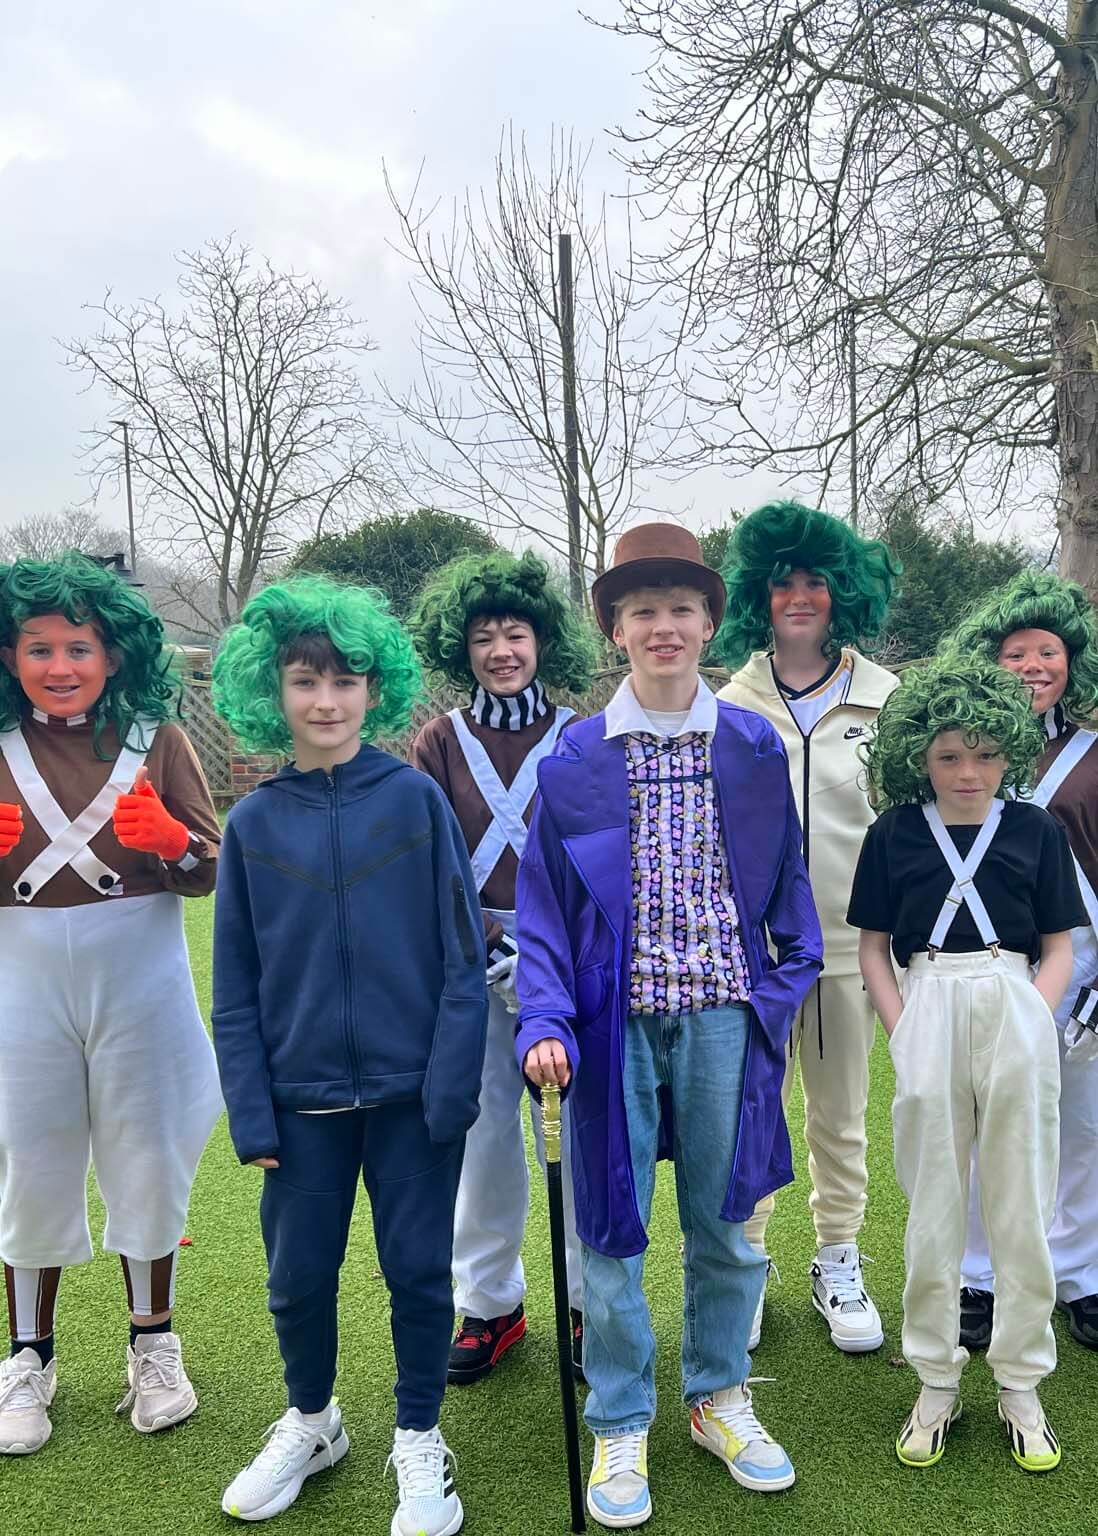 Children dressed up as Oompa Loompas for world book day at Ibstock Place School, Roehampton, a private school near Richmond, Barnes, Putney, Kingston, & Wandsworth